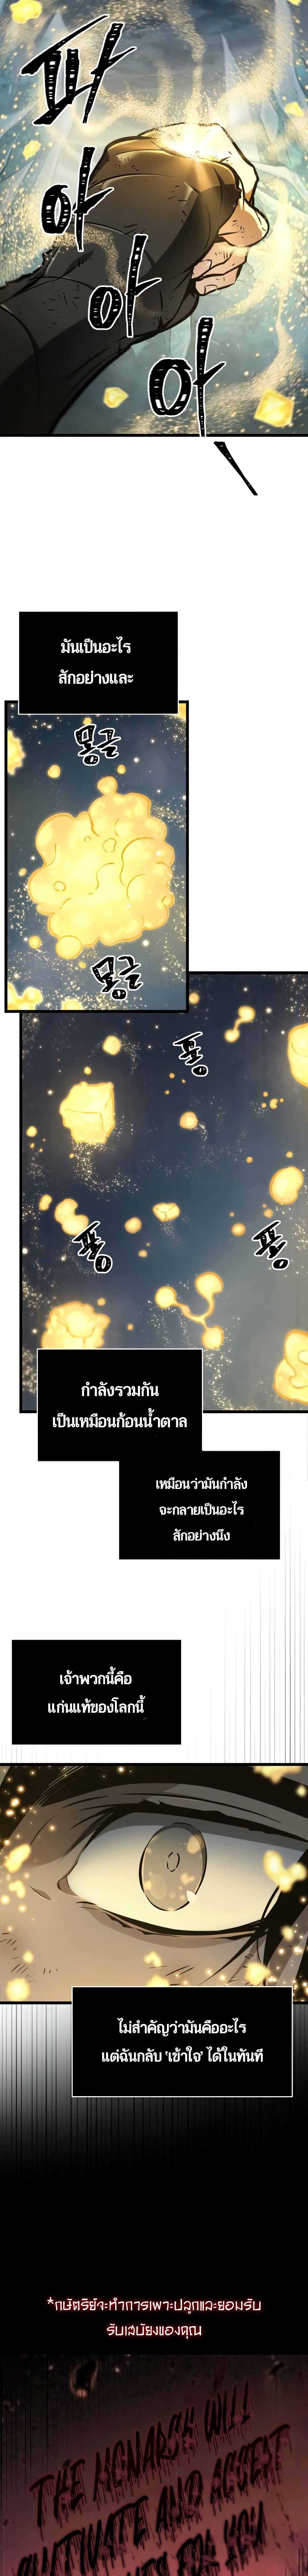 The World After The End 7 แปลไทย